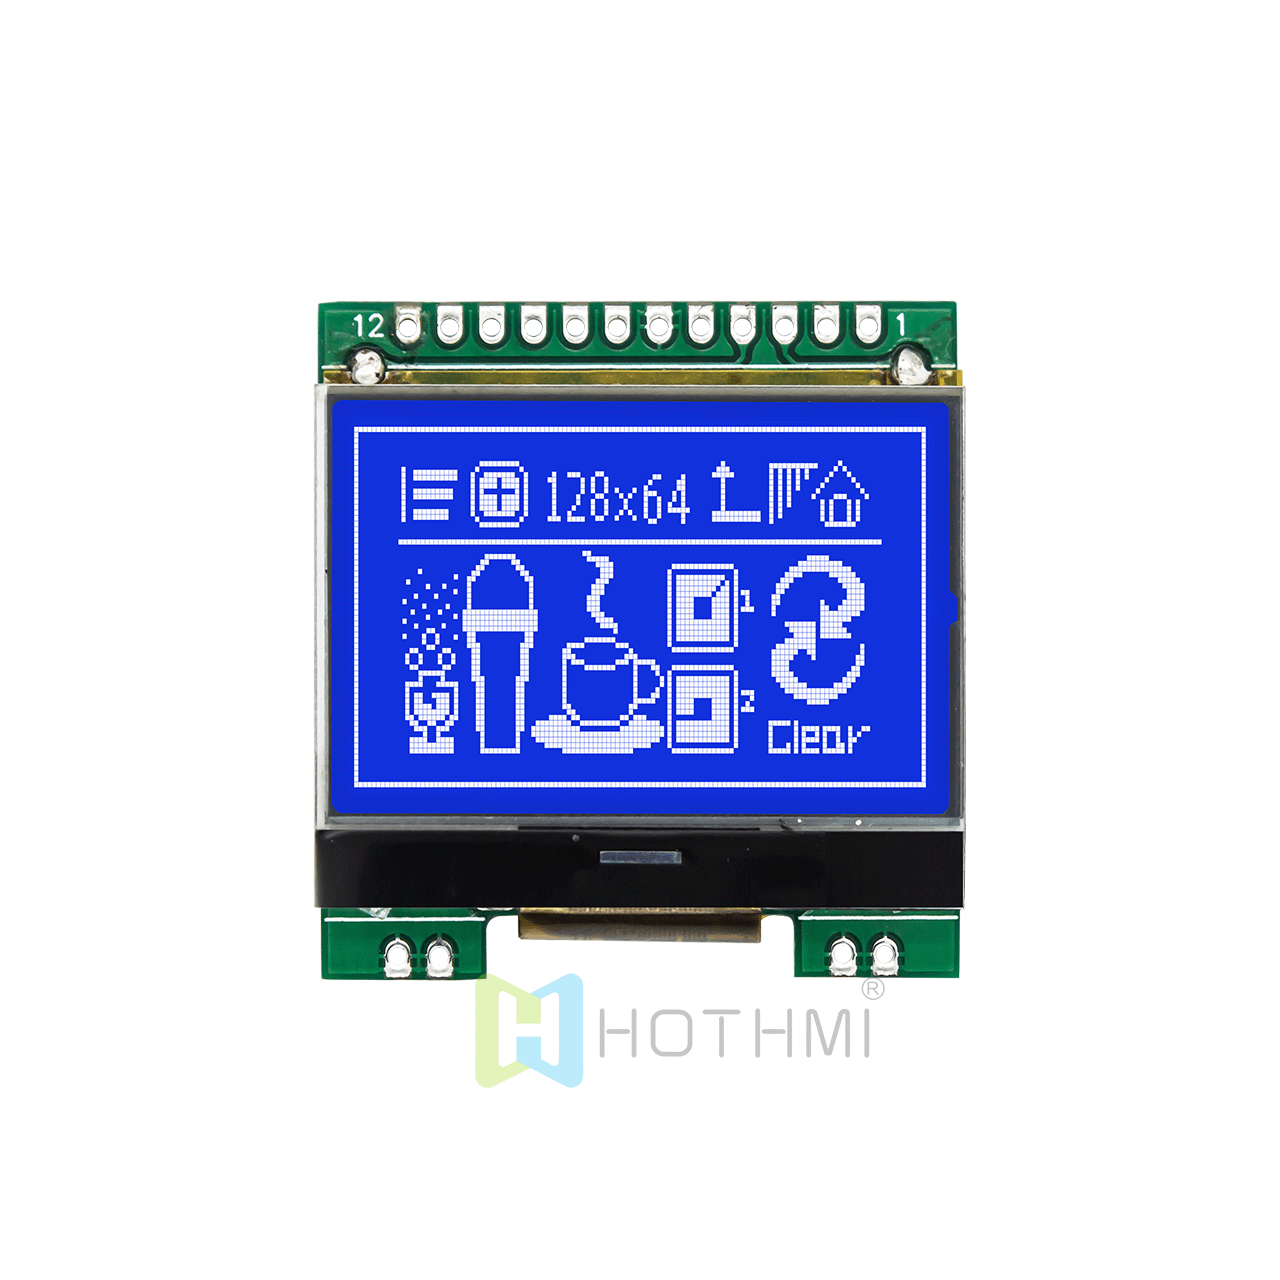 1.7"LCD1264 LCD screen/LCM128x64 graphic dot matrix module/blue background with white characters/ST7567/SPI/1.7 inch